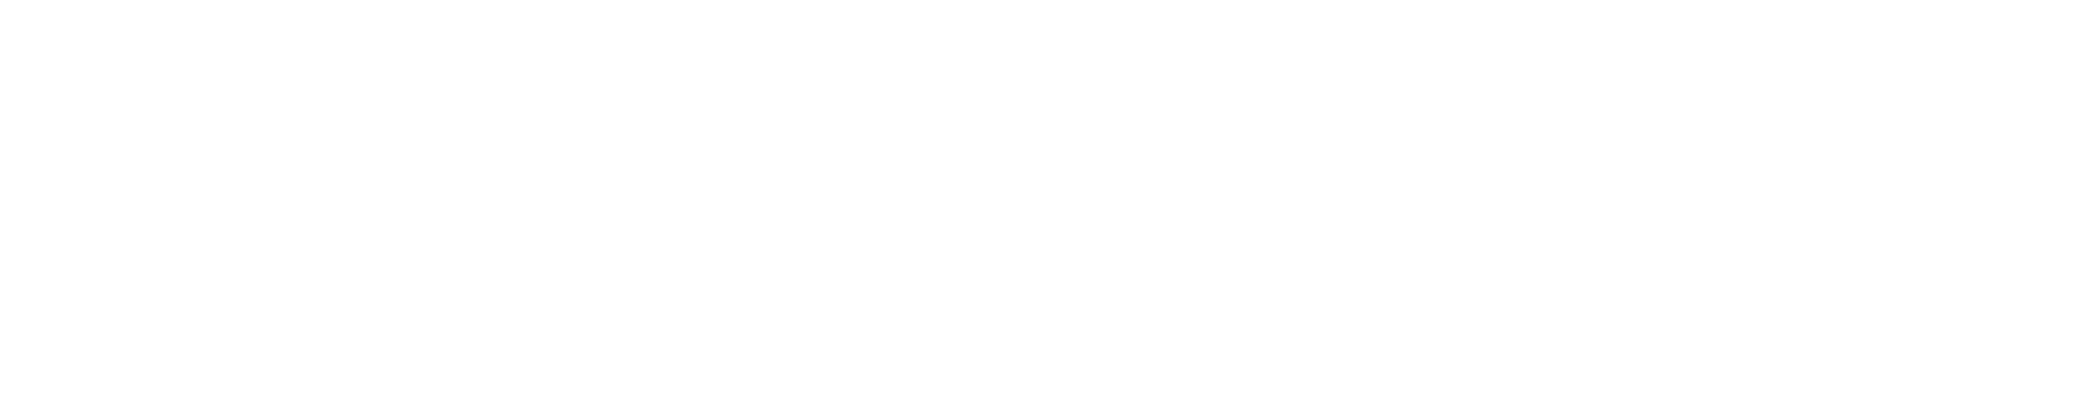 The Wessex Hotel